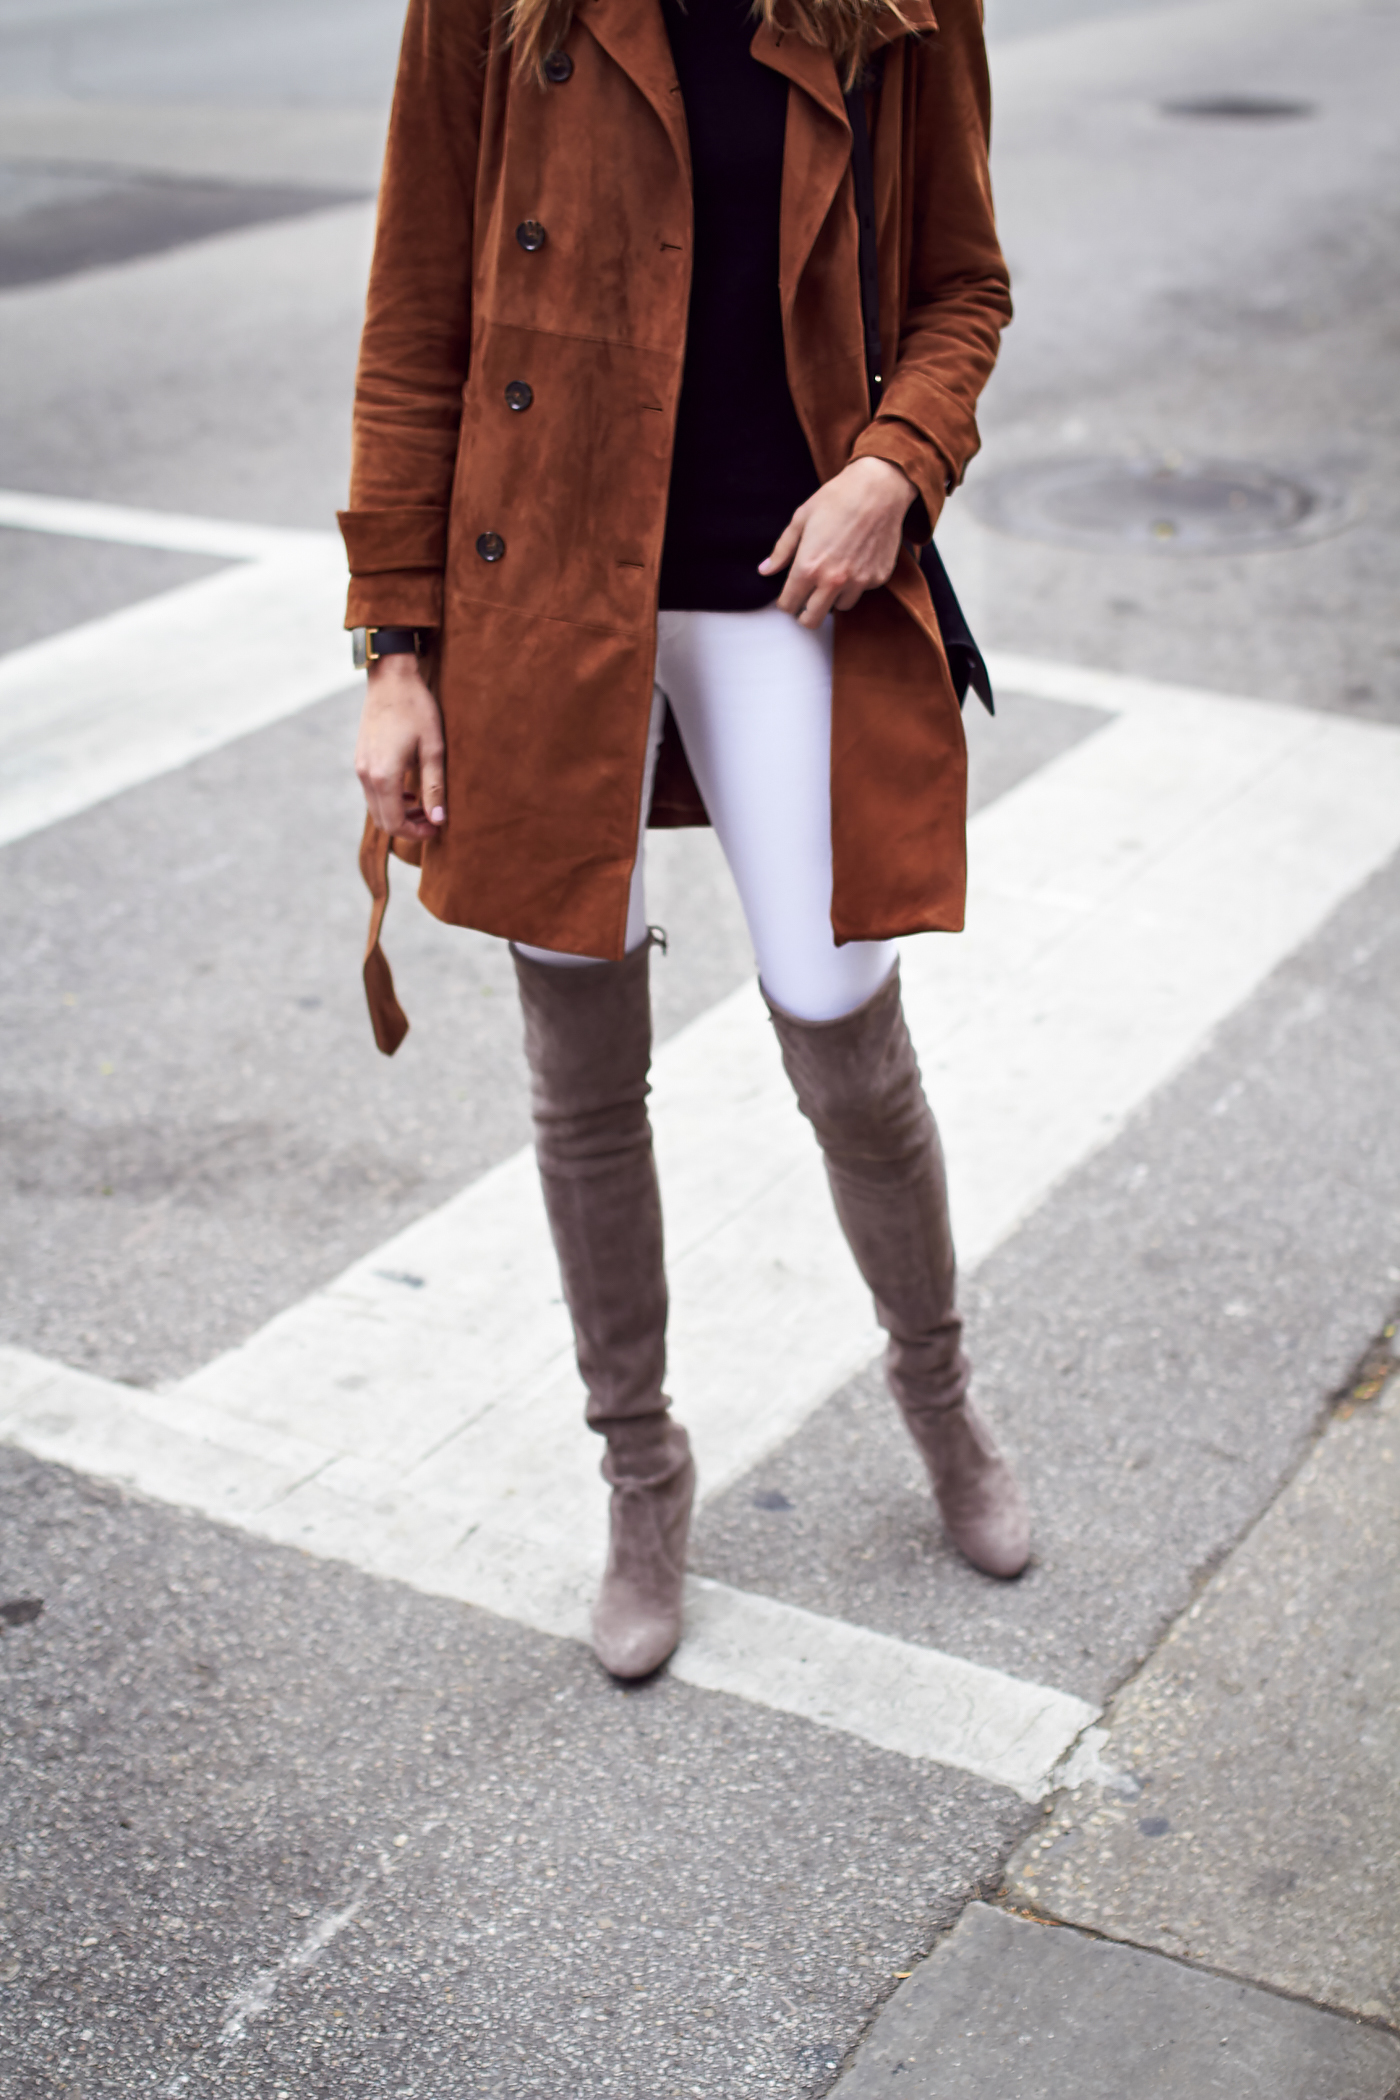 Fall Outfit, Tan Suede Trench Coat, Chloe Faye Handbag, Stuart Weitzman Highland Over-the-Knee Boots, White Skinny Jeans, Black Sweater